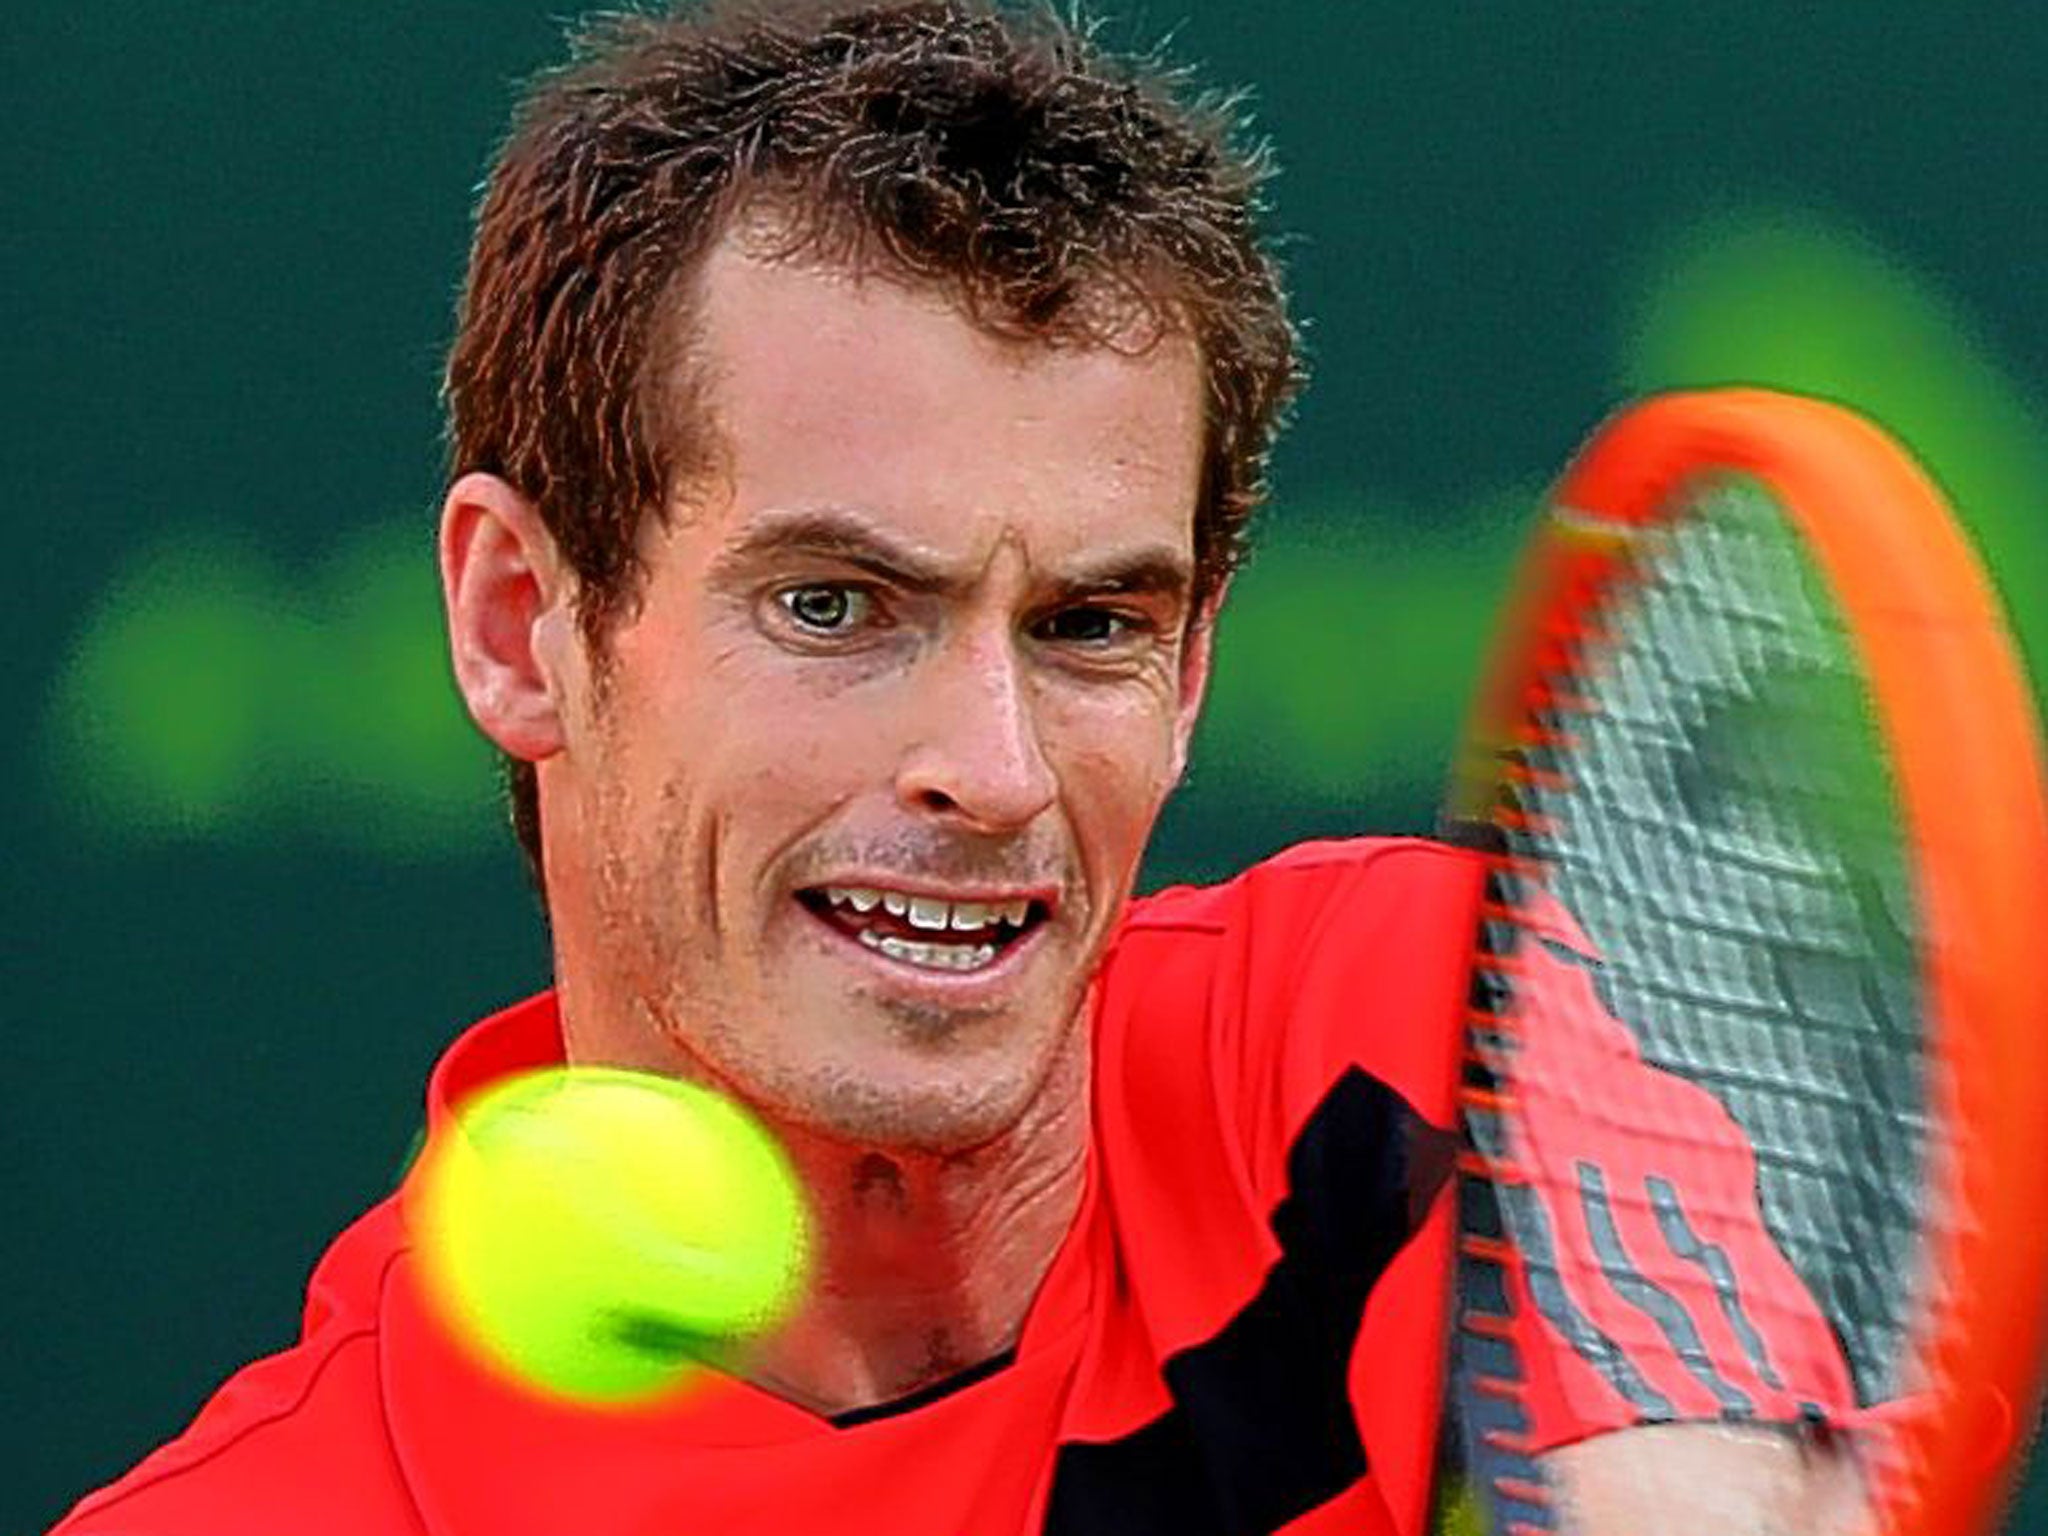 Andy Murray took only 37 minutes to beat Mousa Zayed 6-0, 6-0 in the Qatar Open